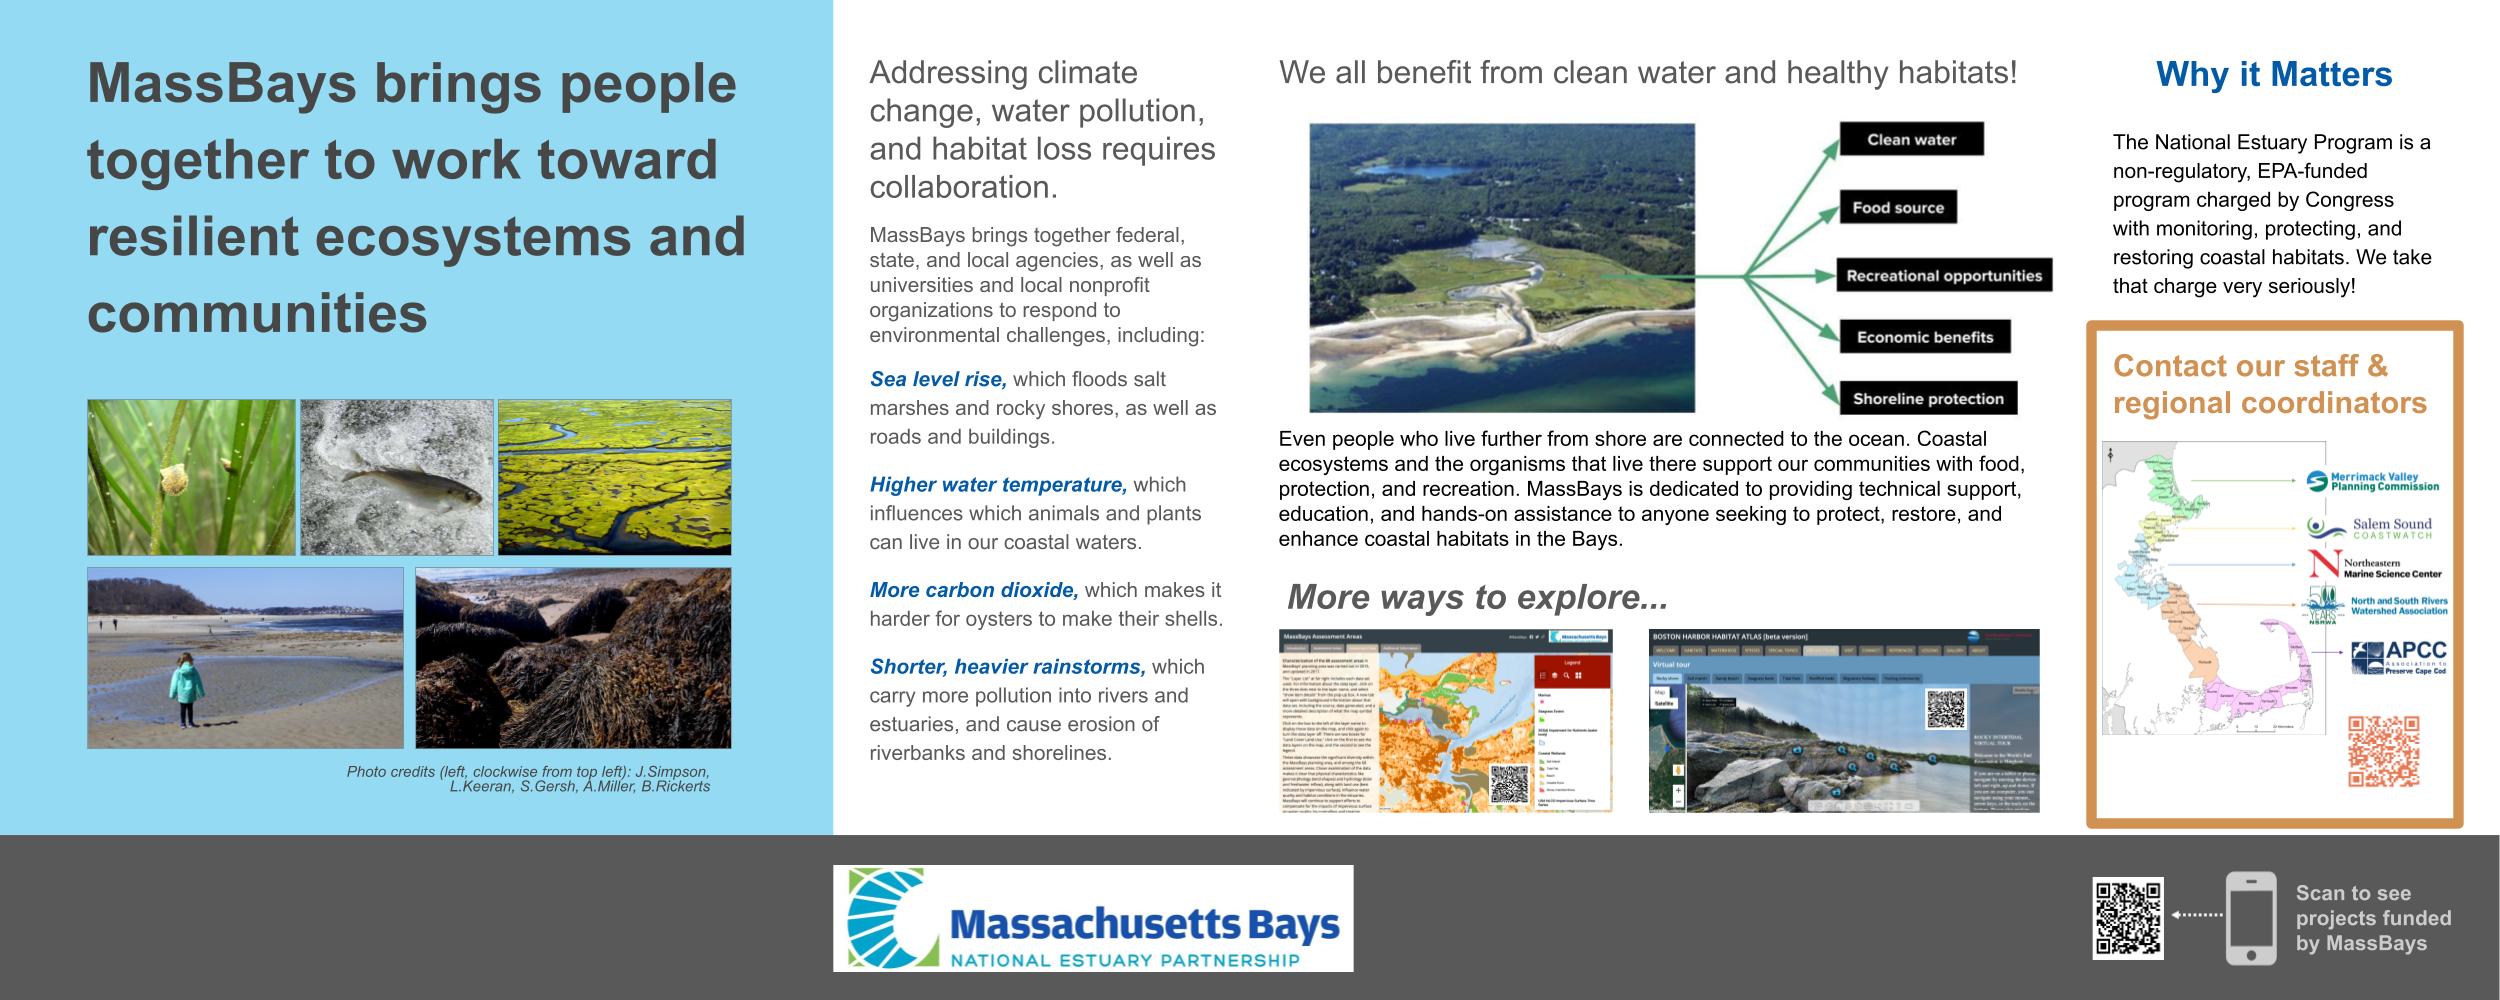 Poster closes the science walk by describing how MassBays provides support so we all benefit from clean water and healthy habitats.